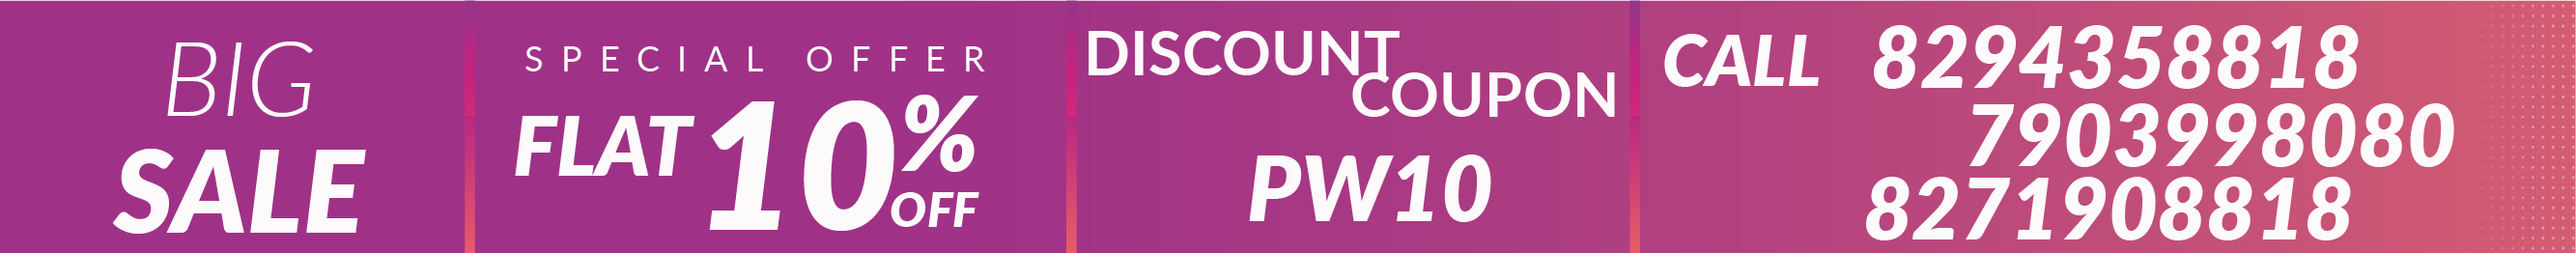 Padhaiwale Cupon Code PW10 Flat 10 Percent Discount